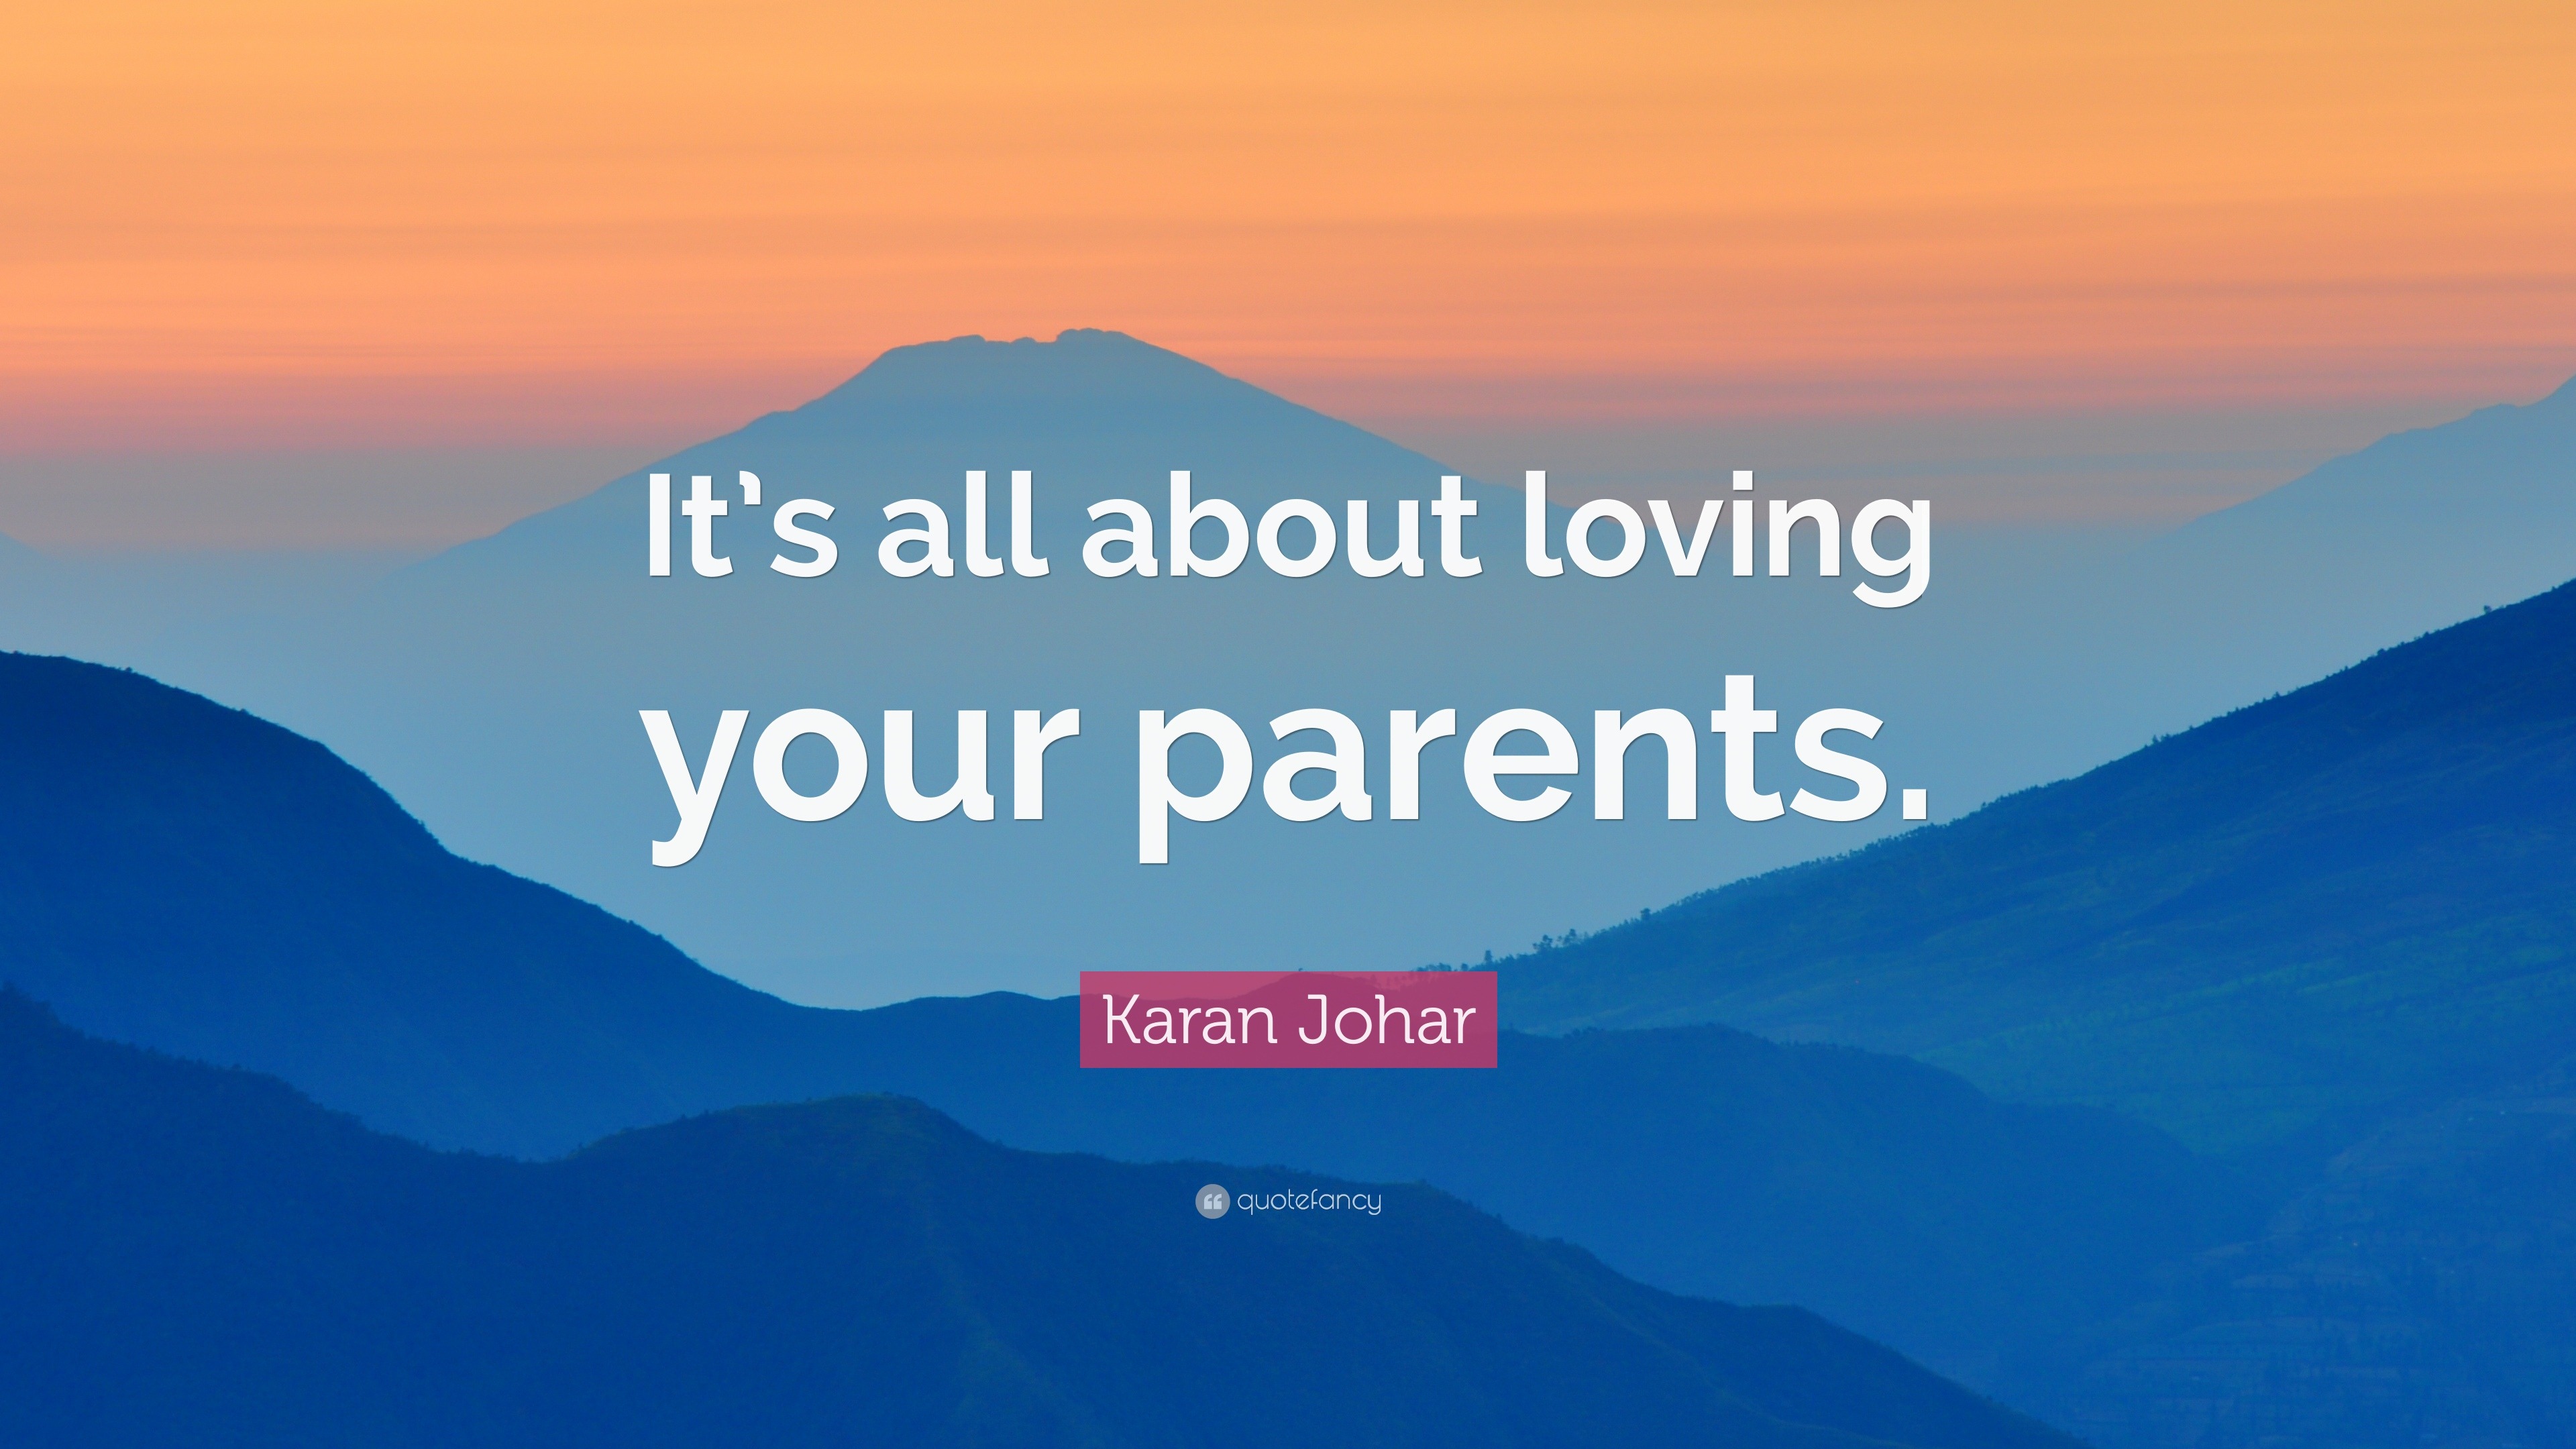 Karan Johar Quote: “It's all about loving your parents.”